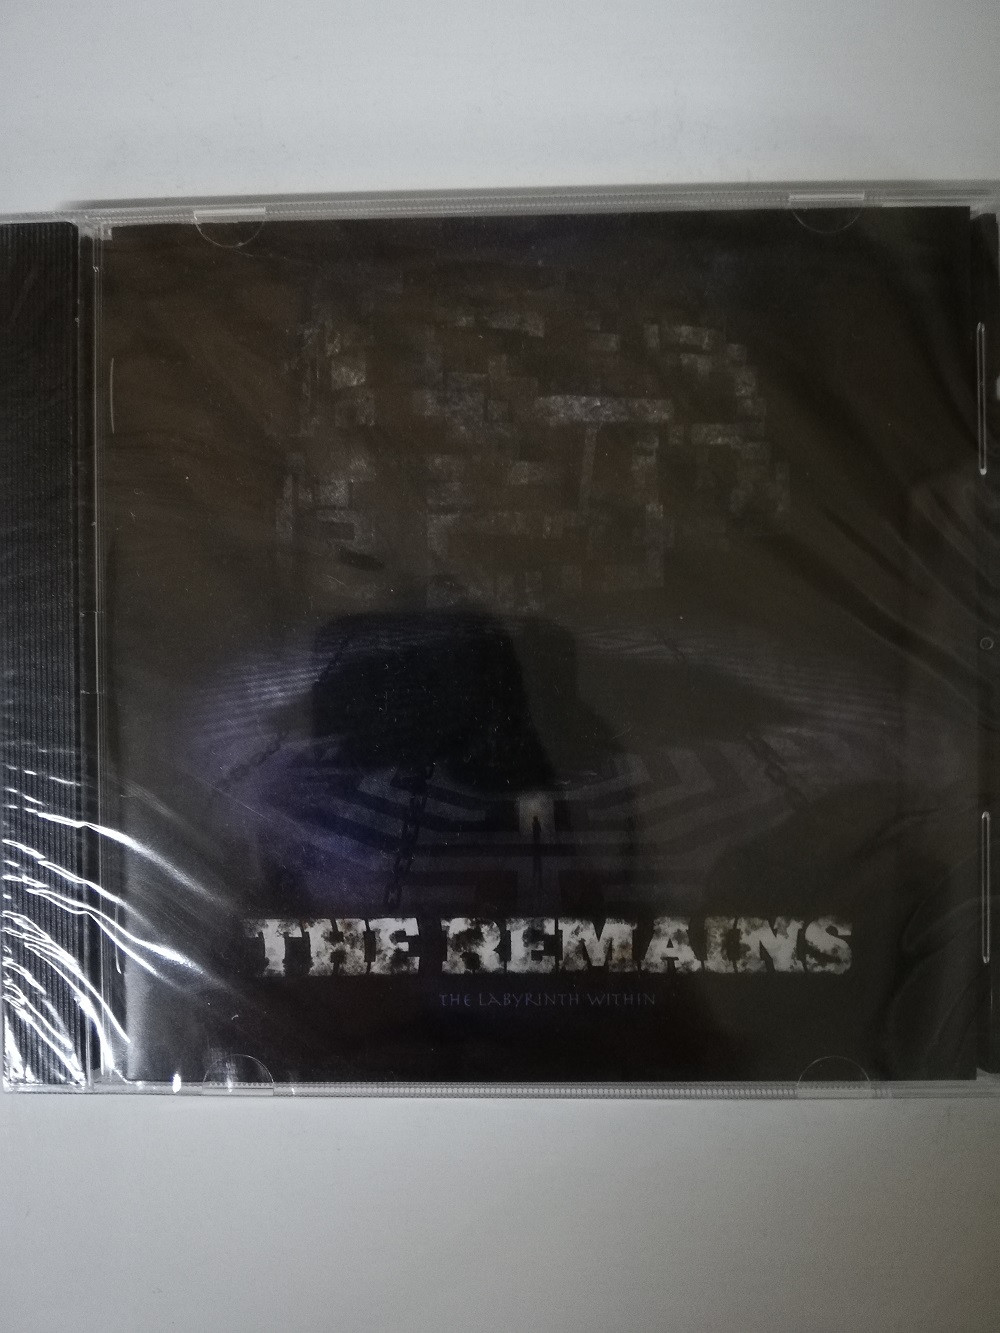 Imagen CD THE REMAINS - THE LABYRINTH WITHIN